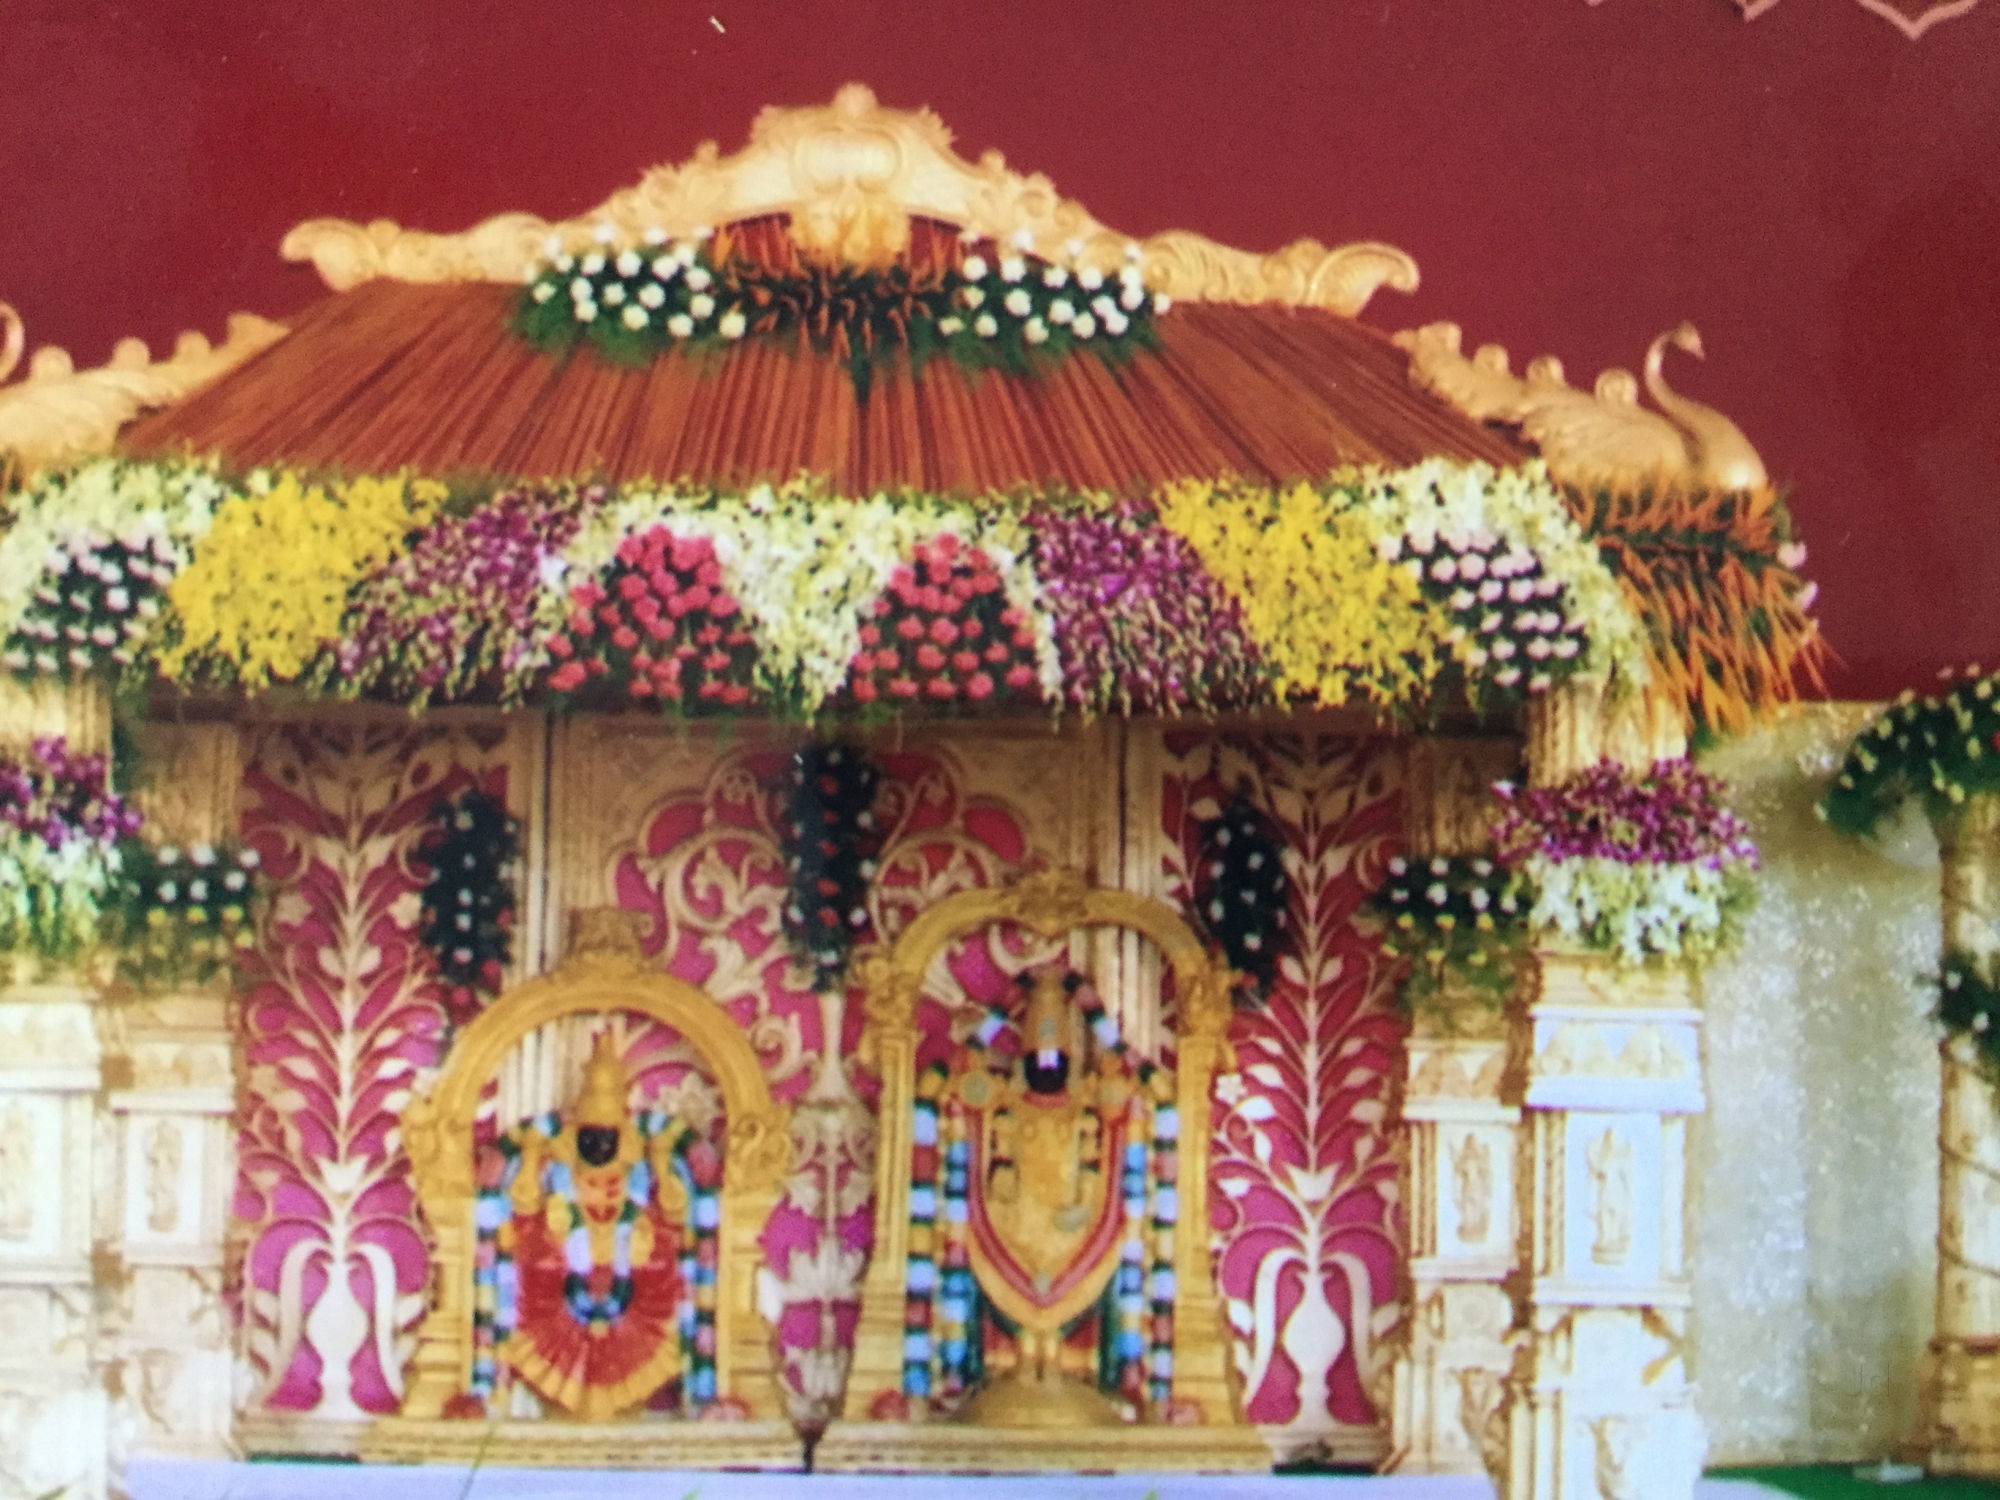 Anil Flower Decoration Photos, Nagole, Hyderabad- Pictures & Images ...